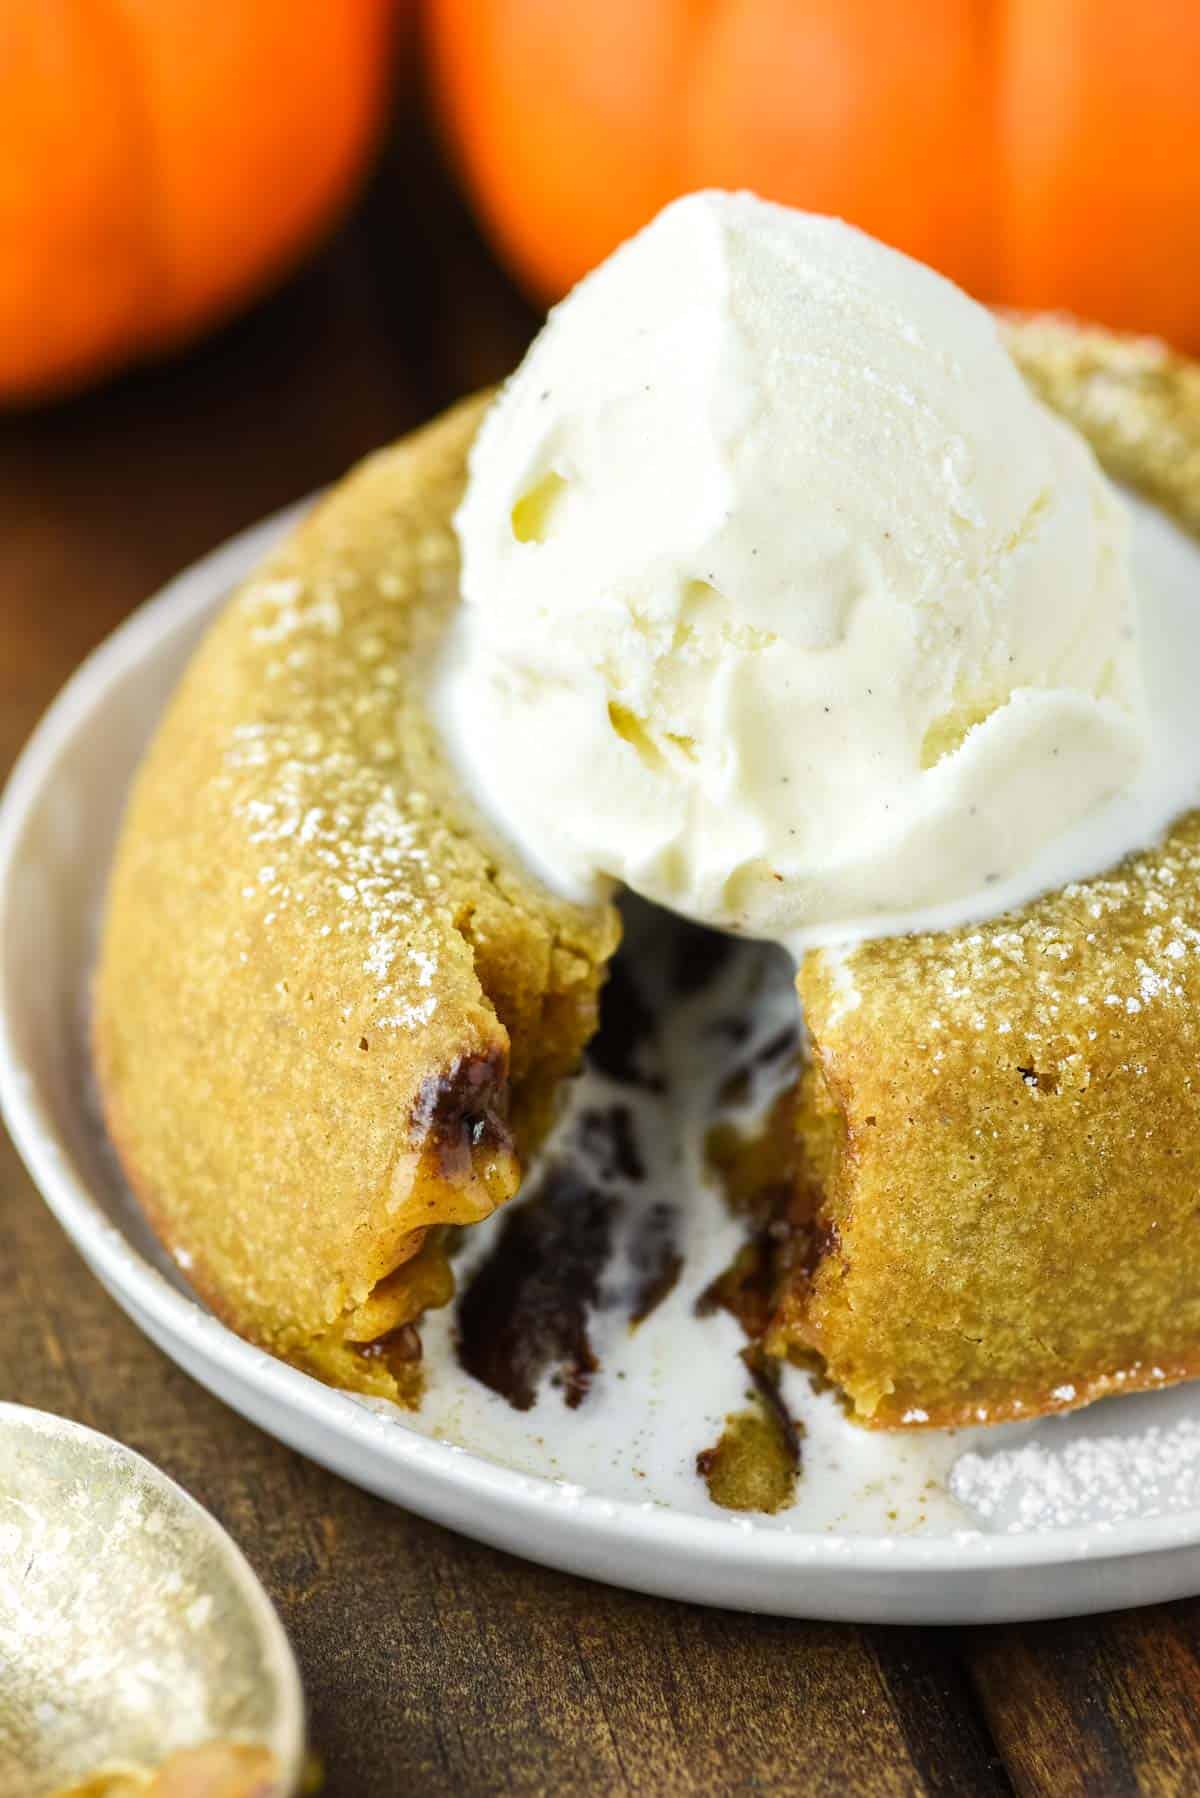 Pumpkin lava cake with scoop of vanilla ice cream on white plate and wooden background.